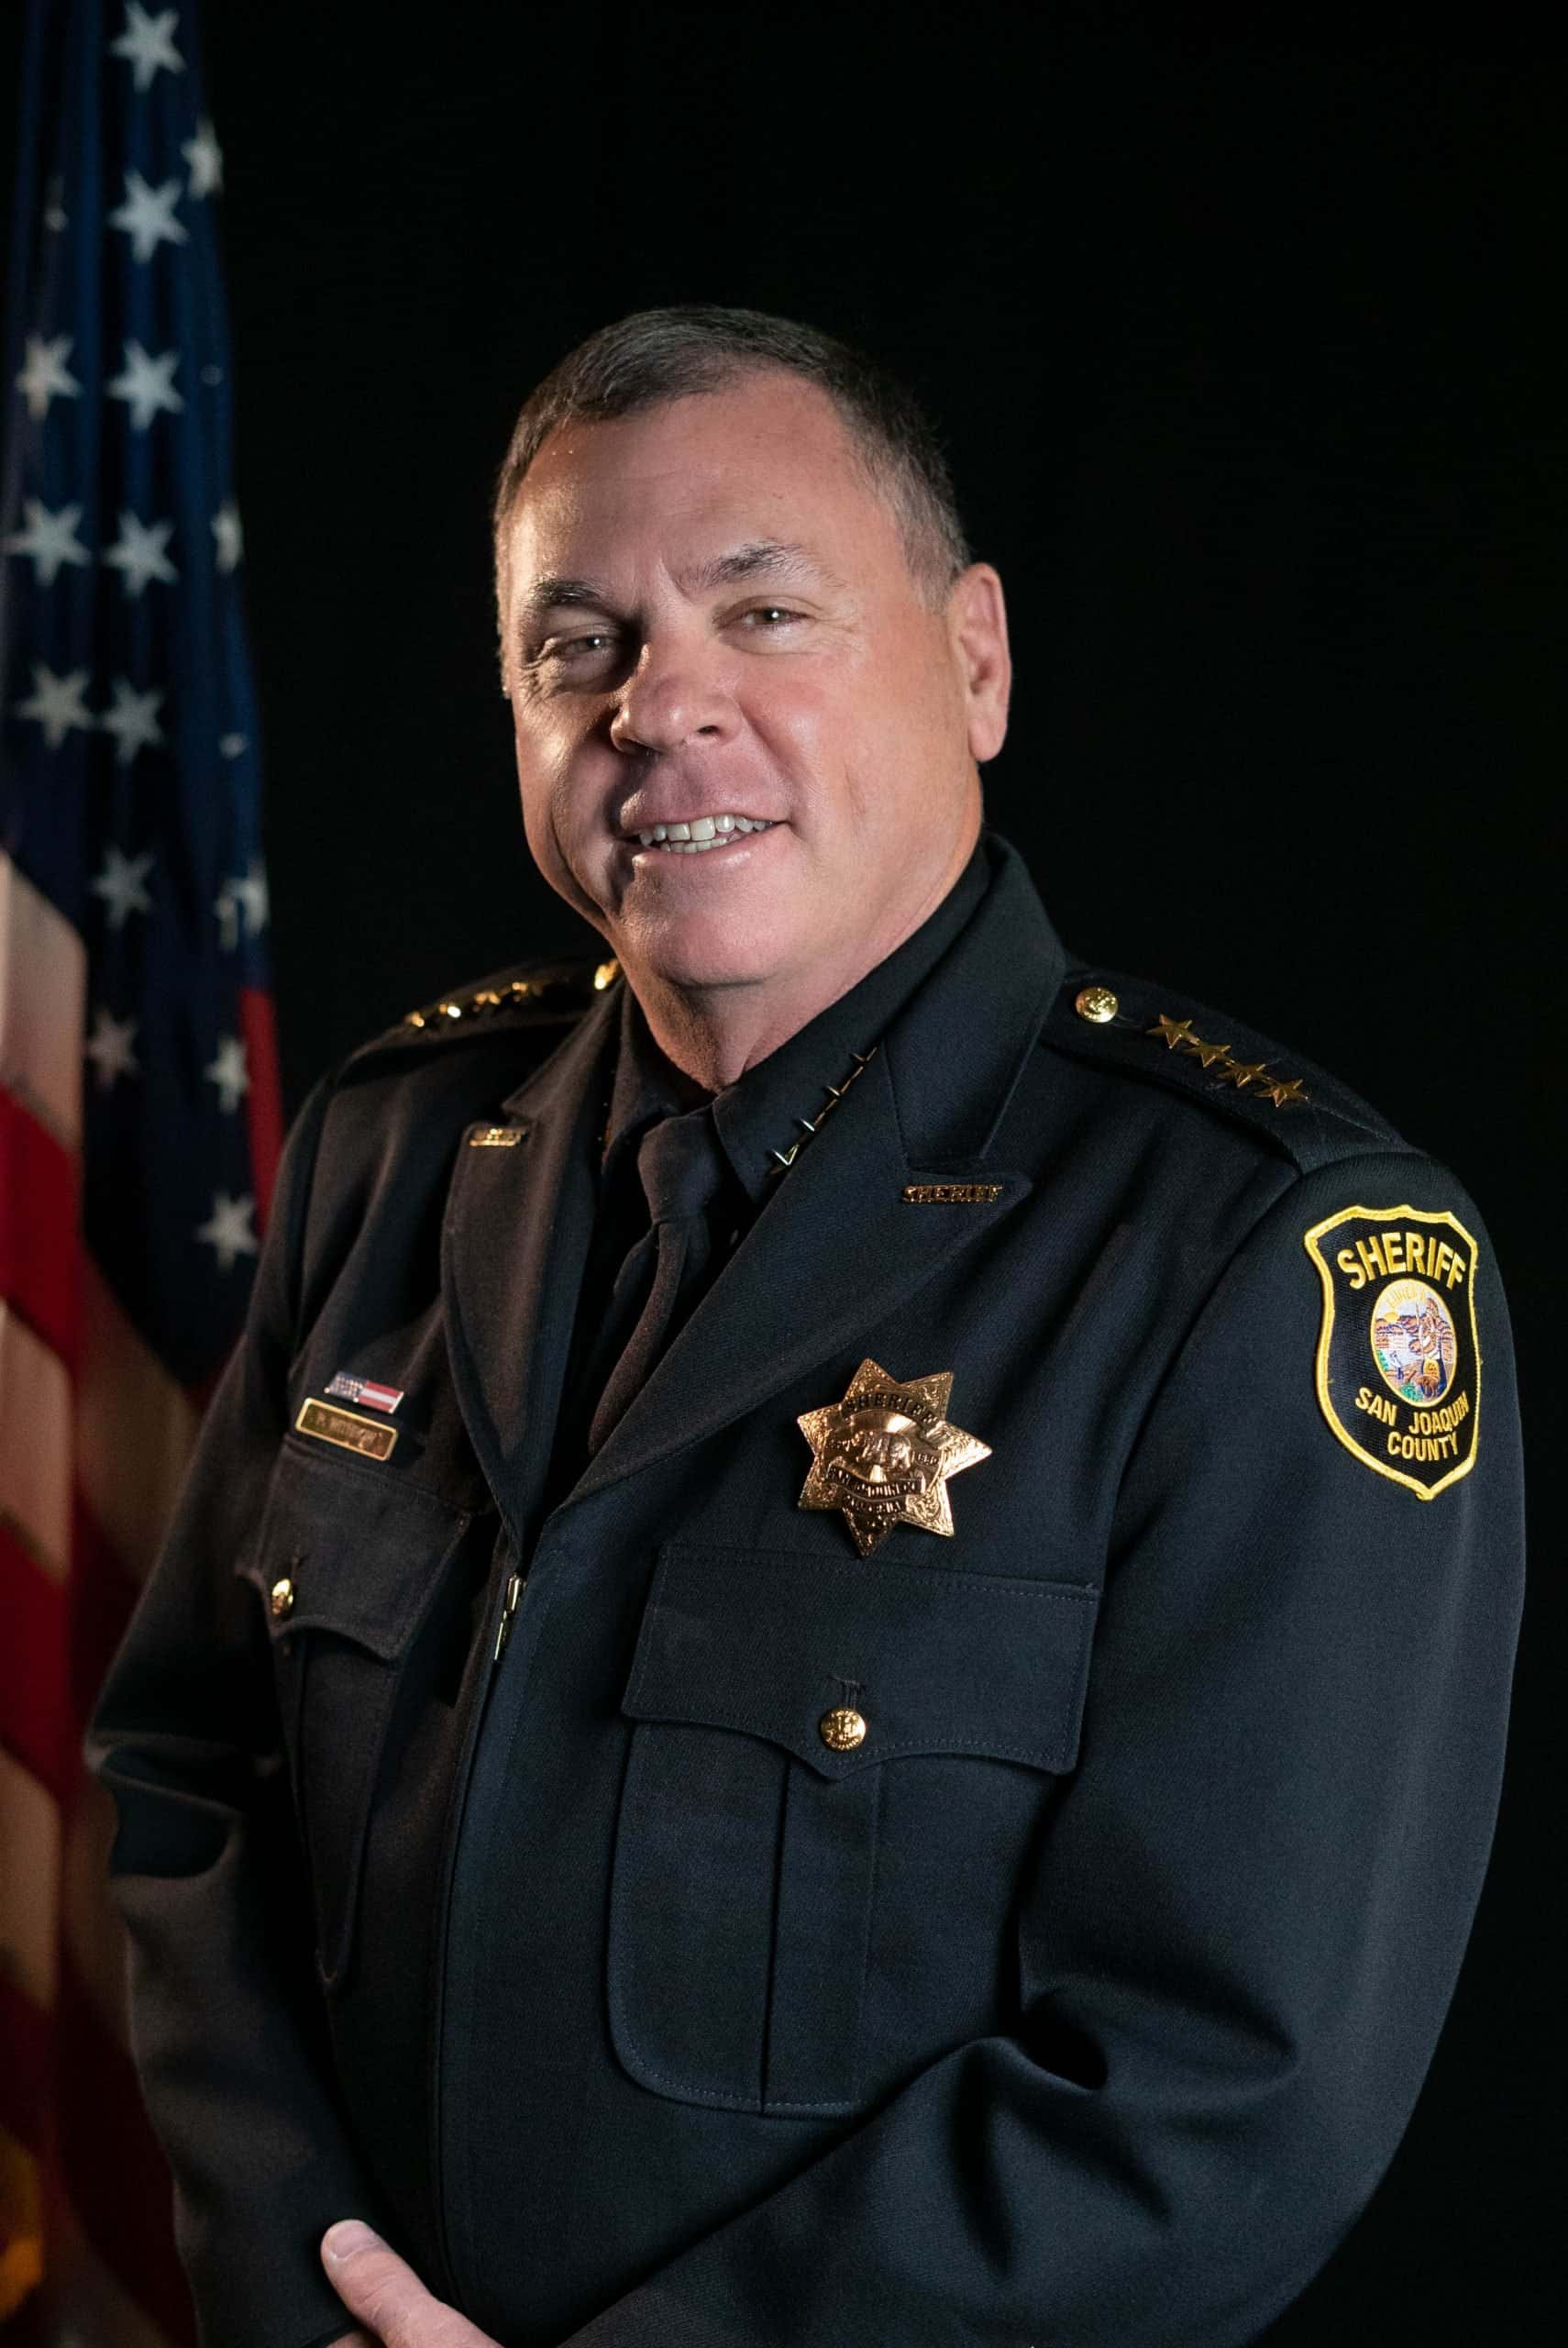 San Joaquin County Sheriff's Office Sheriff Patrick Withrow